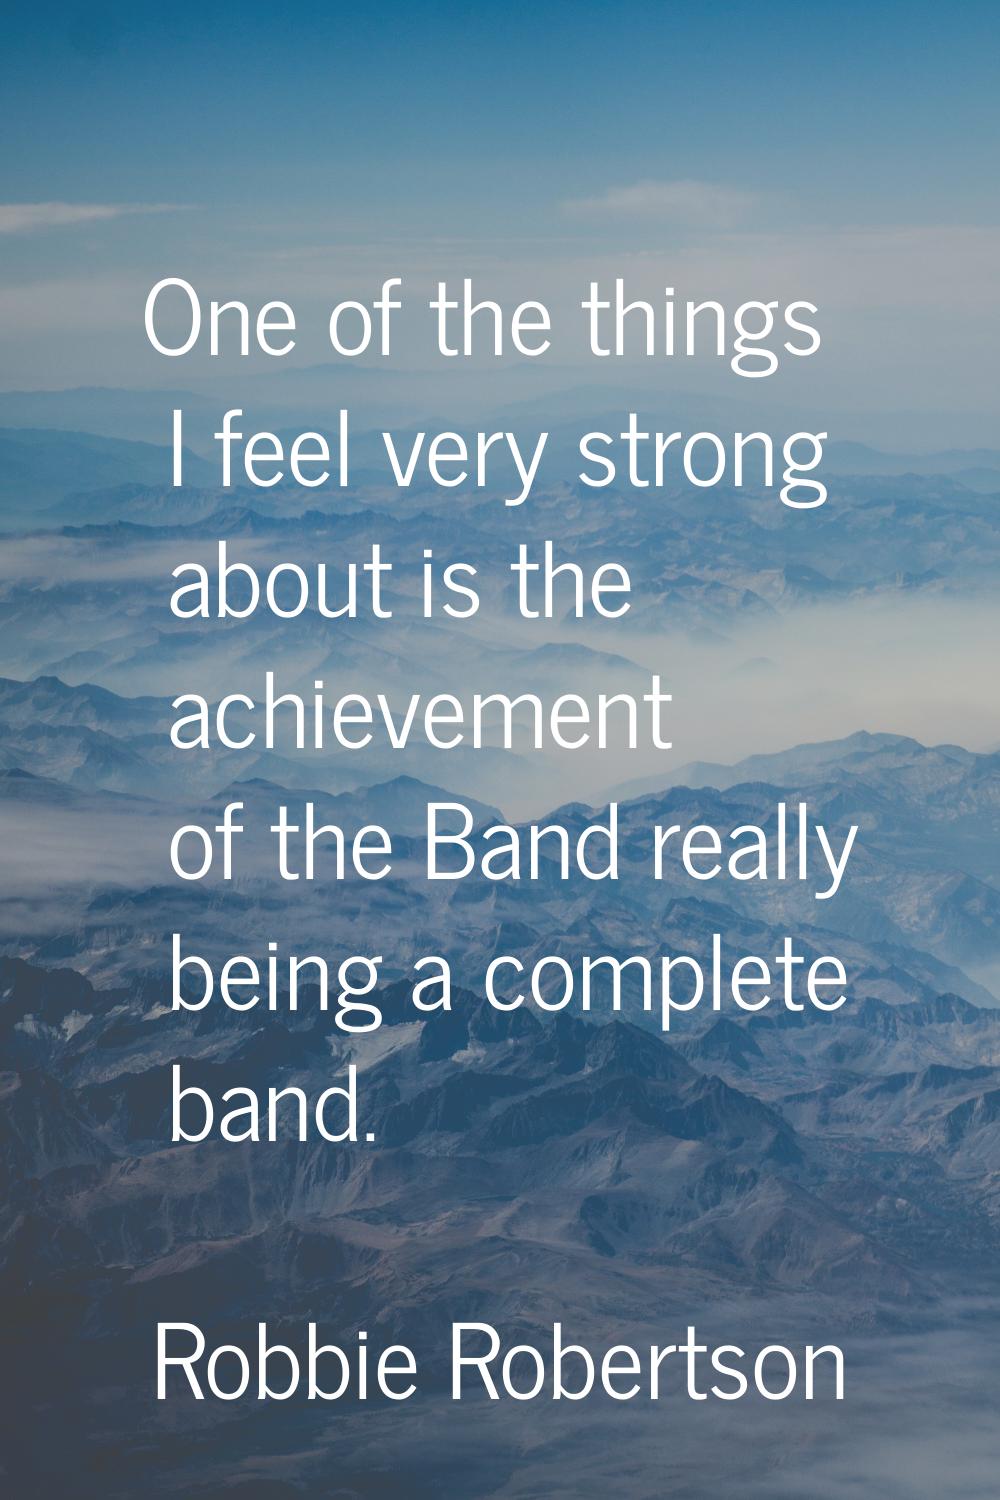 One of the things I feel very strong about is the achievement of the Band really being a complete b